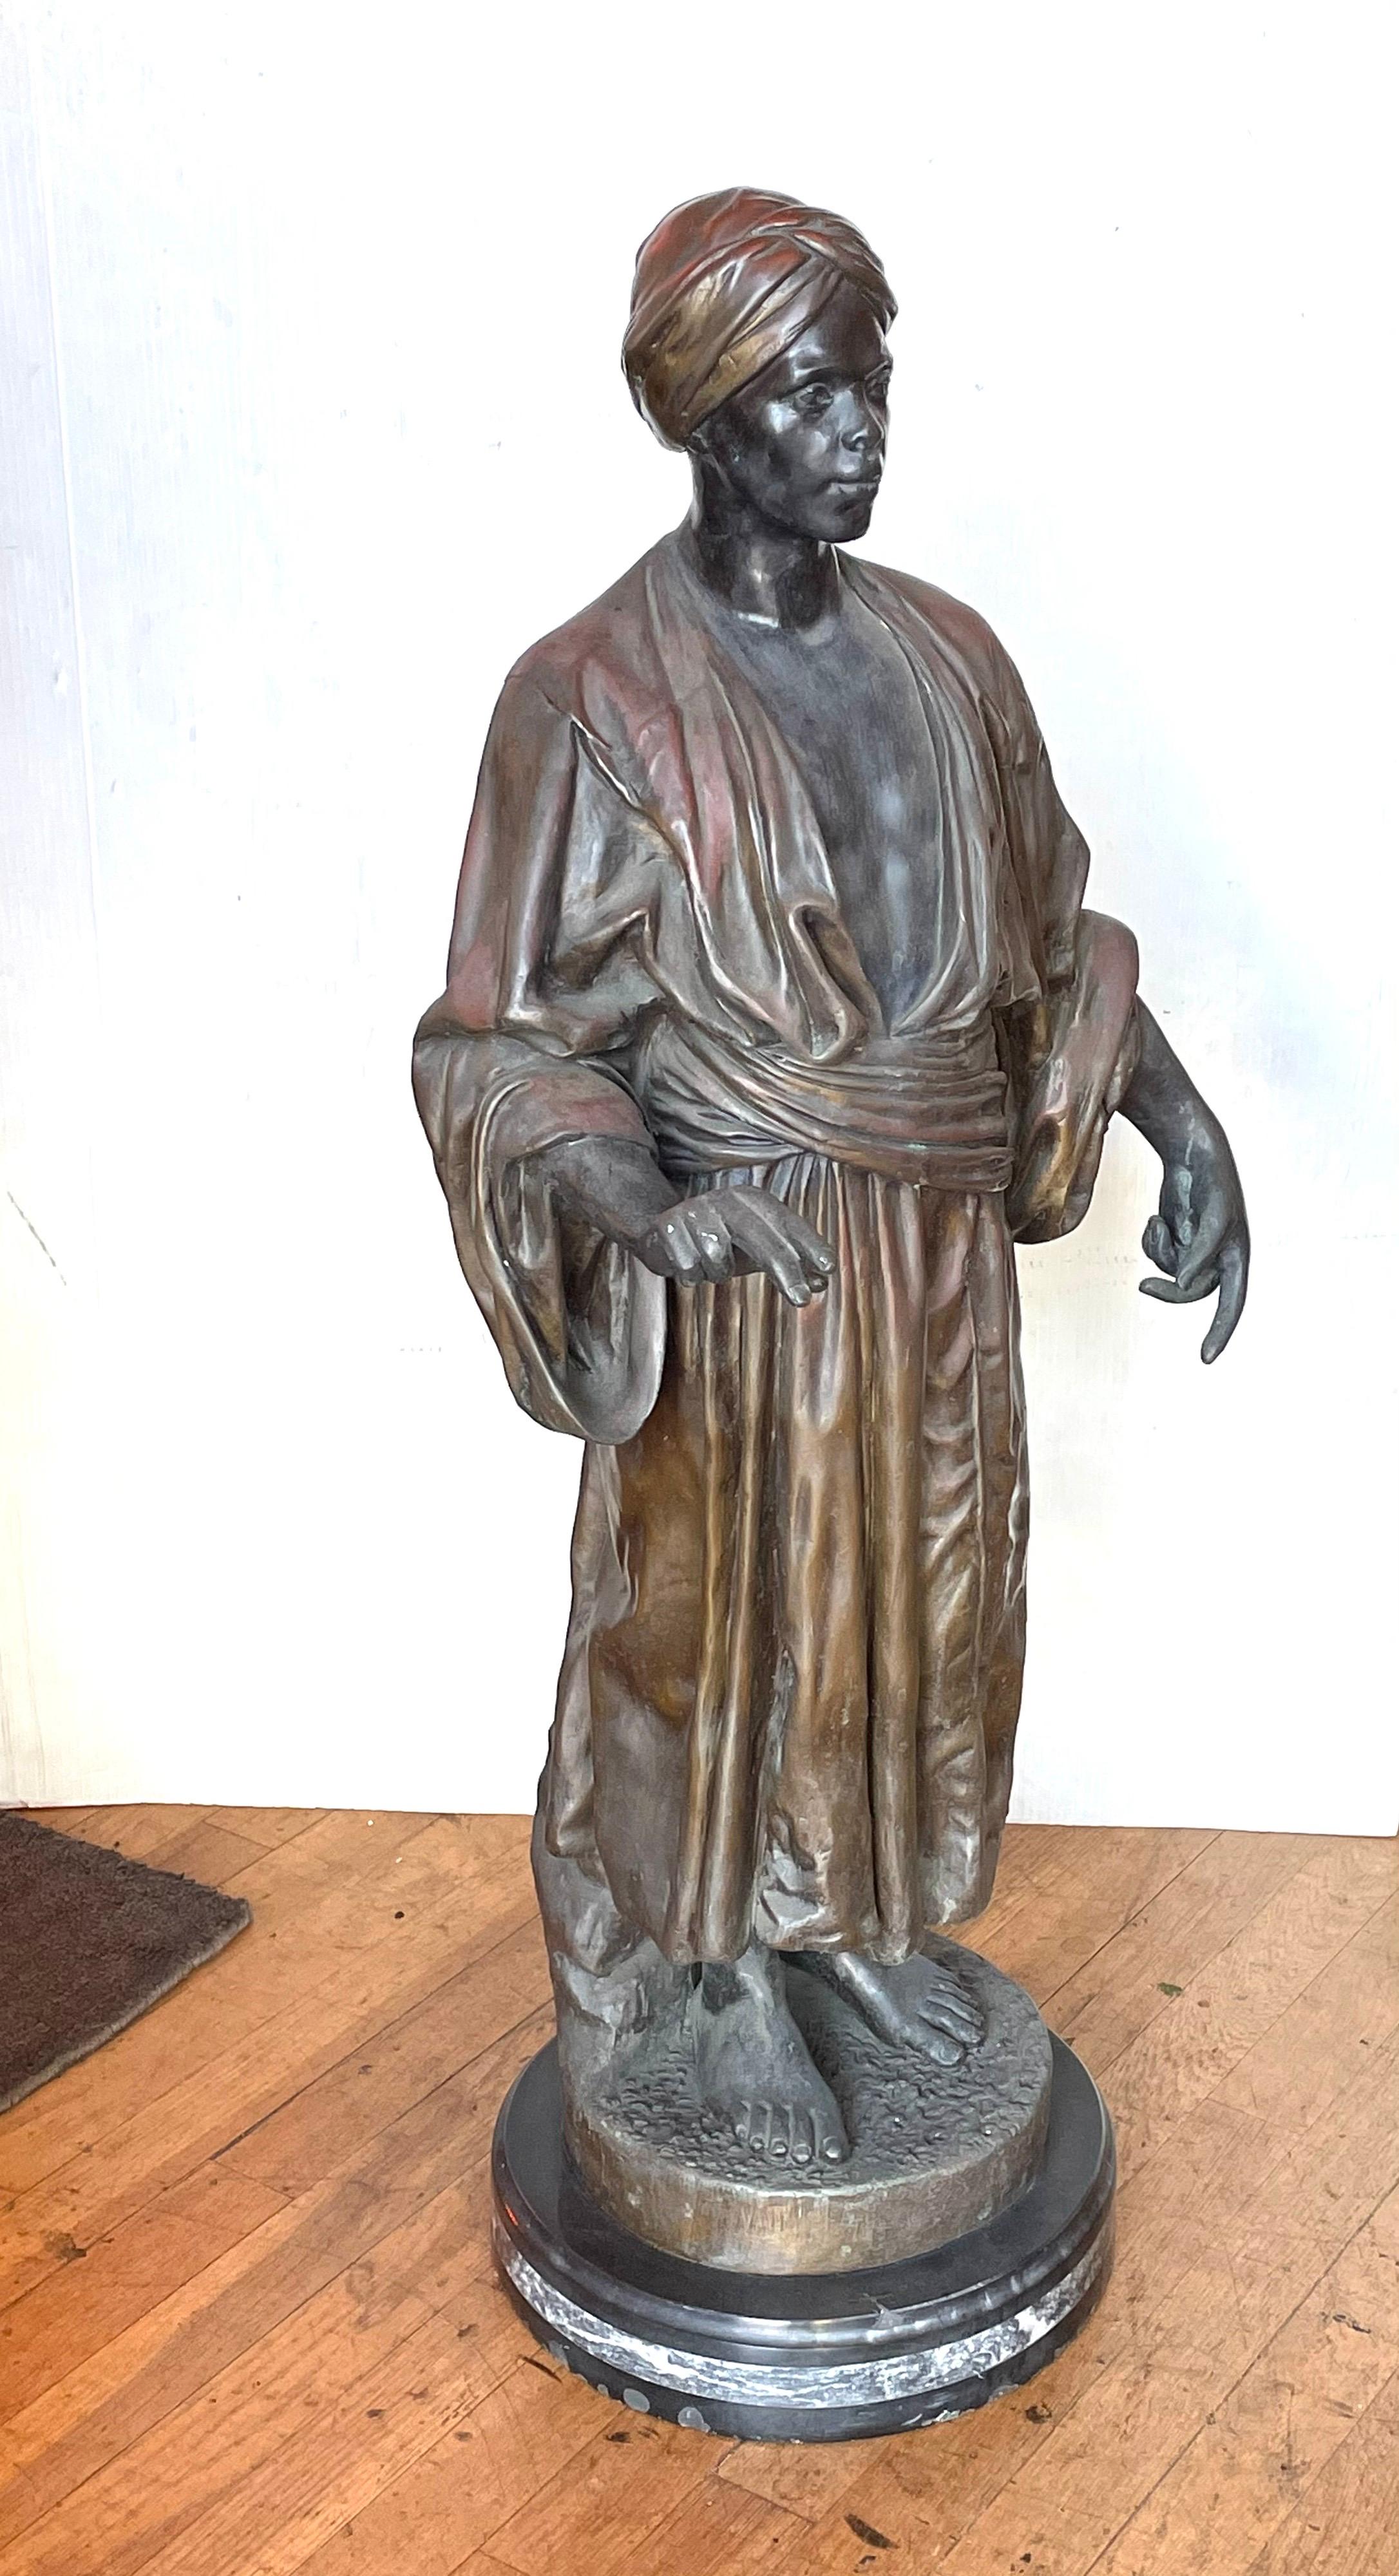 Beautiful tall bronze & marble base by listed artist Charles Renee Masse, signed title Jeune Arabe, this piece its part of a series that have many auction results. Signed dated 